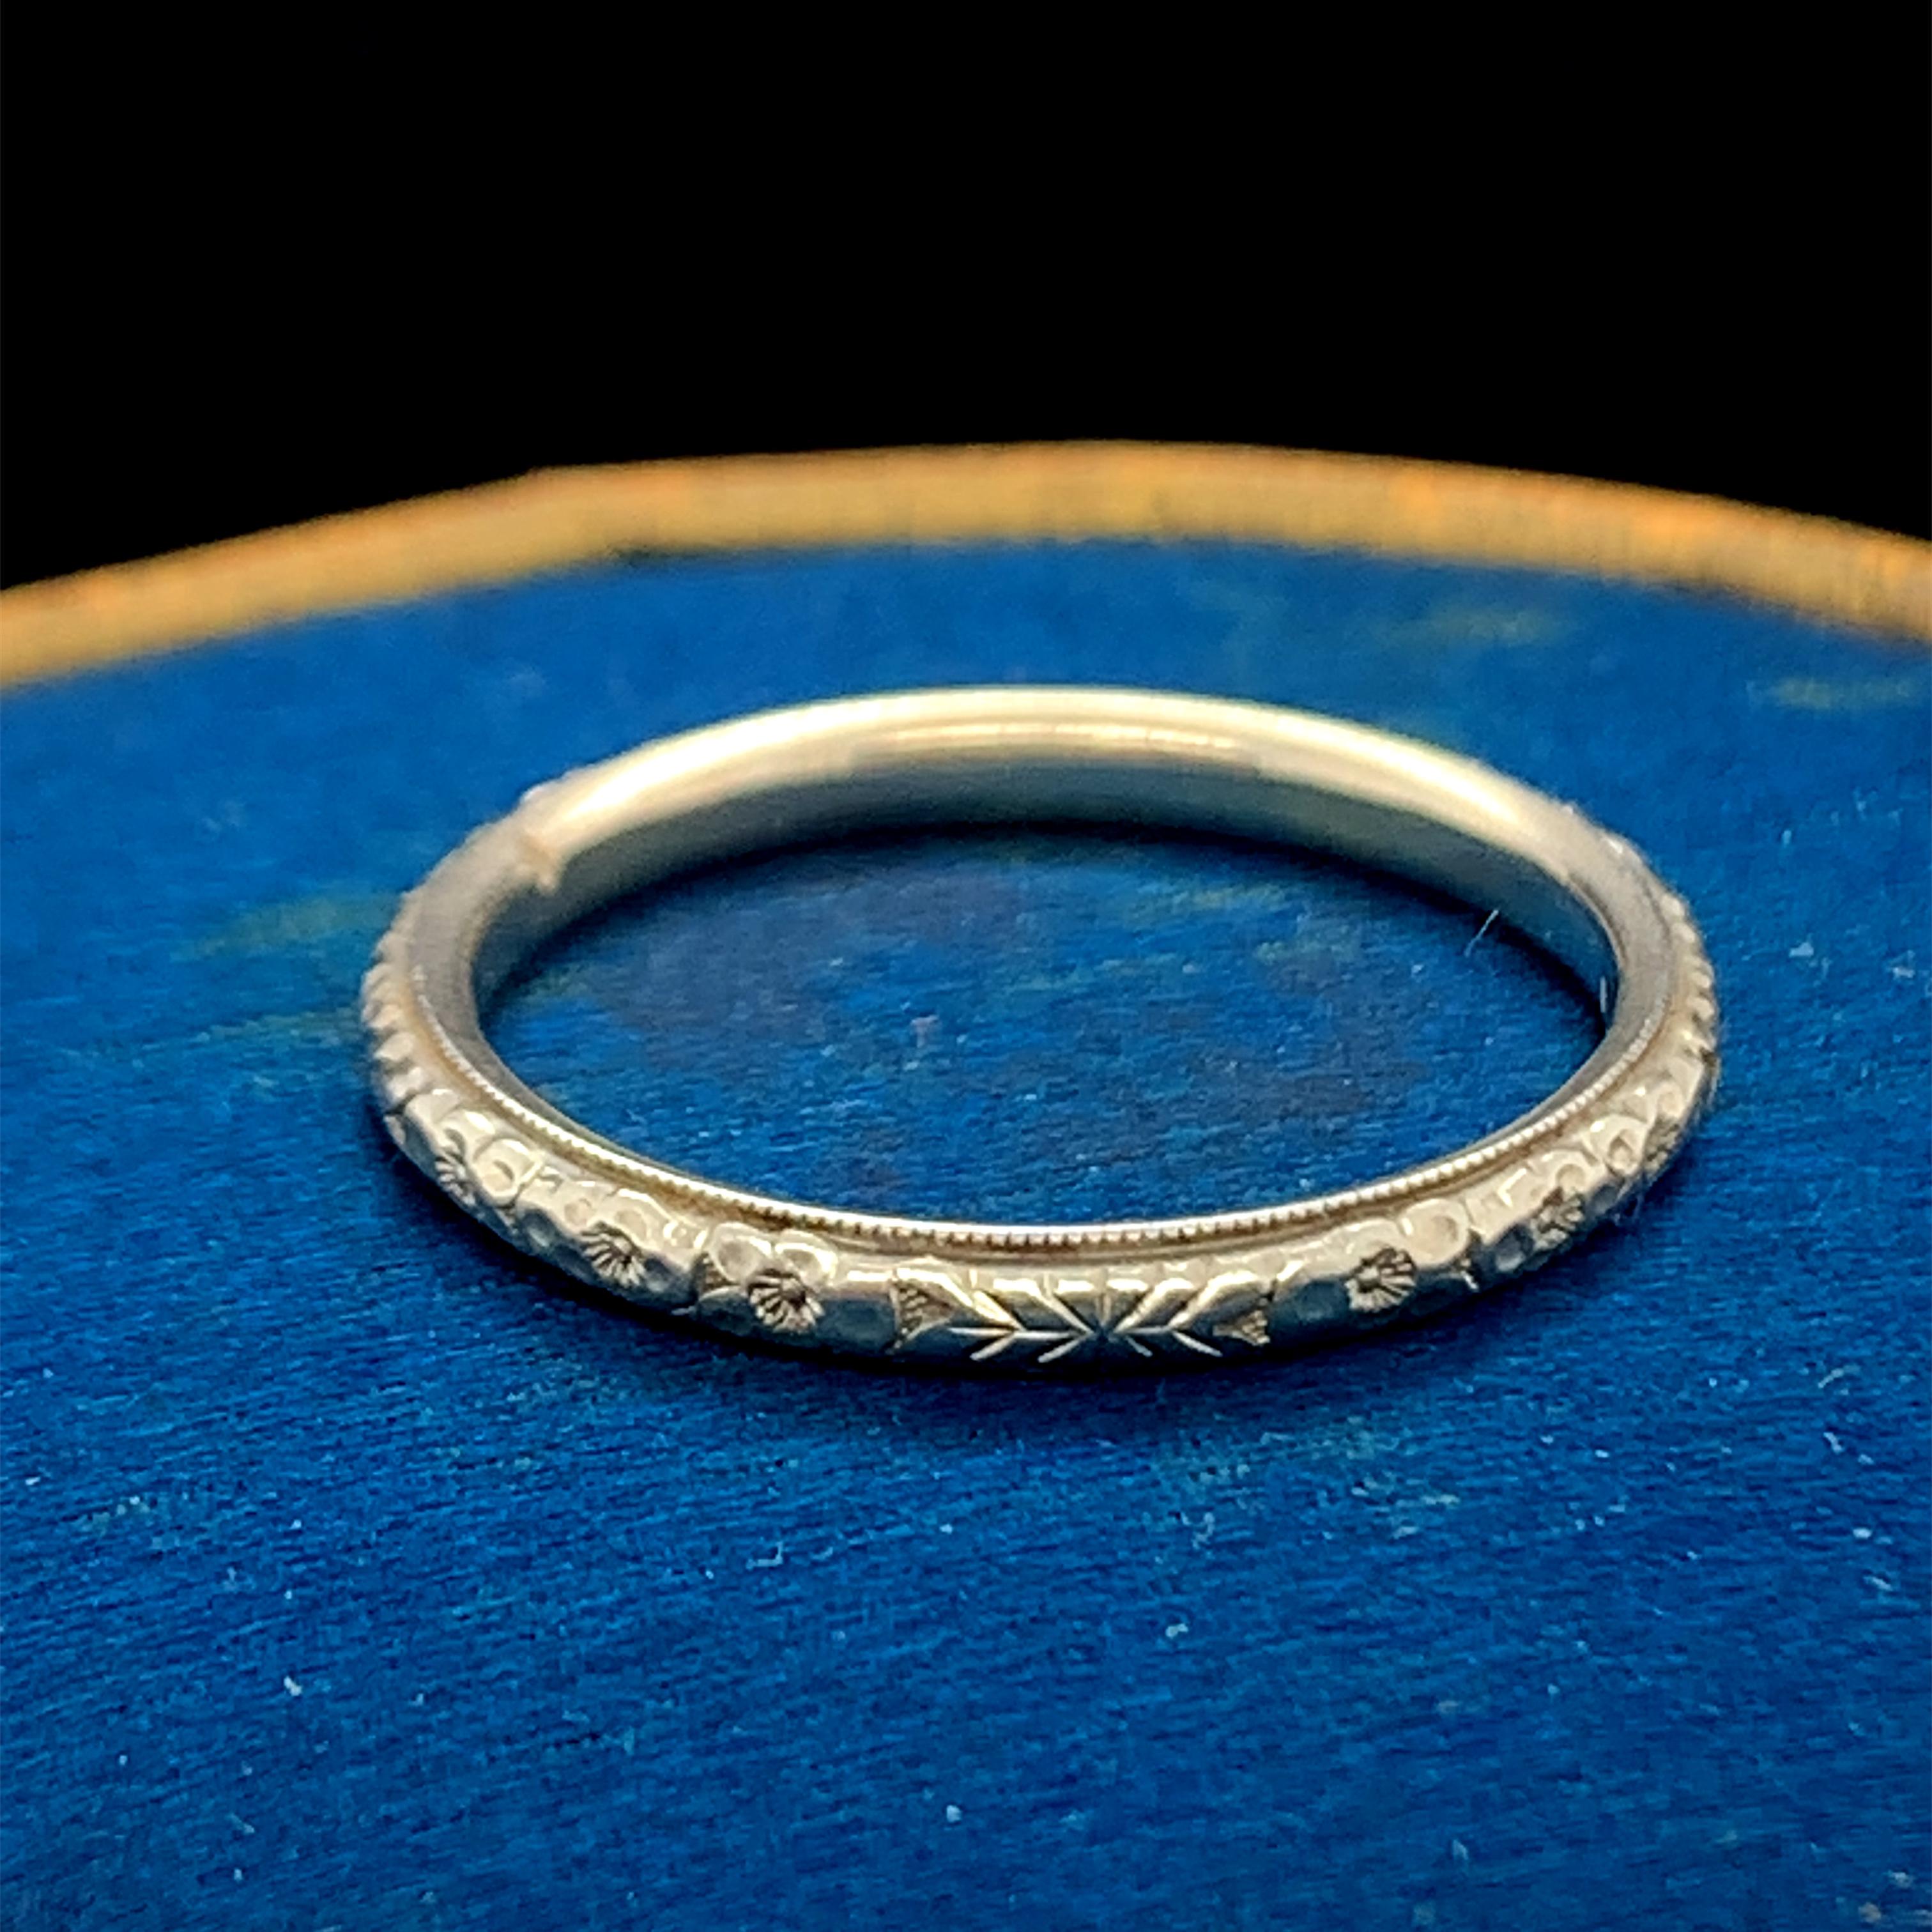 Year: 1920s

Item Details: 
Ring Size: 8
Metal Type: 18k White Gold  [Hallmarked, and Tested]
Weight:  3 grams

Finger to Top of Stone Measurement: 1.9 mm
Condition:  Excellent


Price: 650

This ring can be sized up 1 size for an additional $40. If